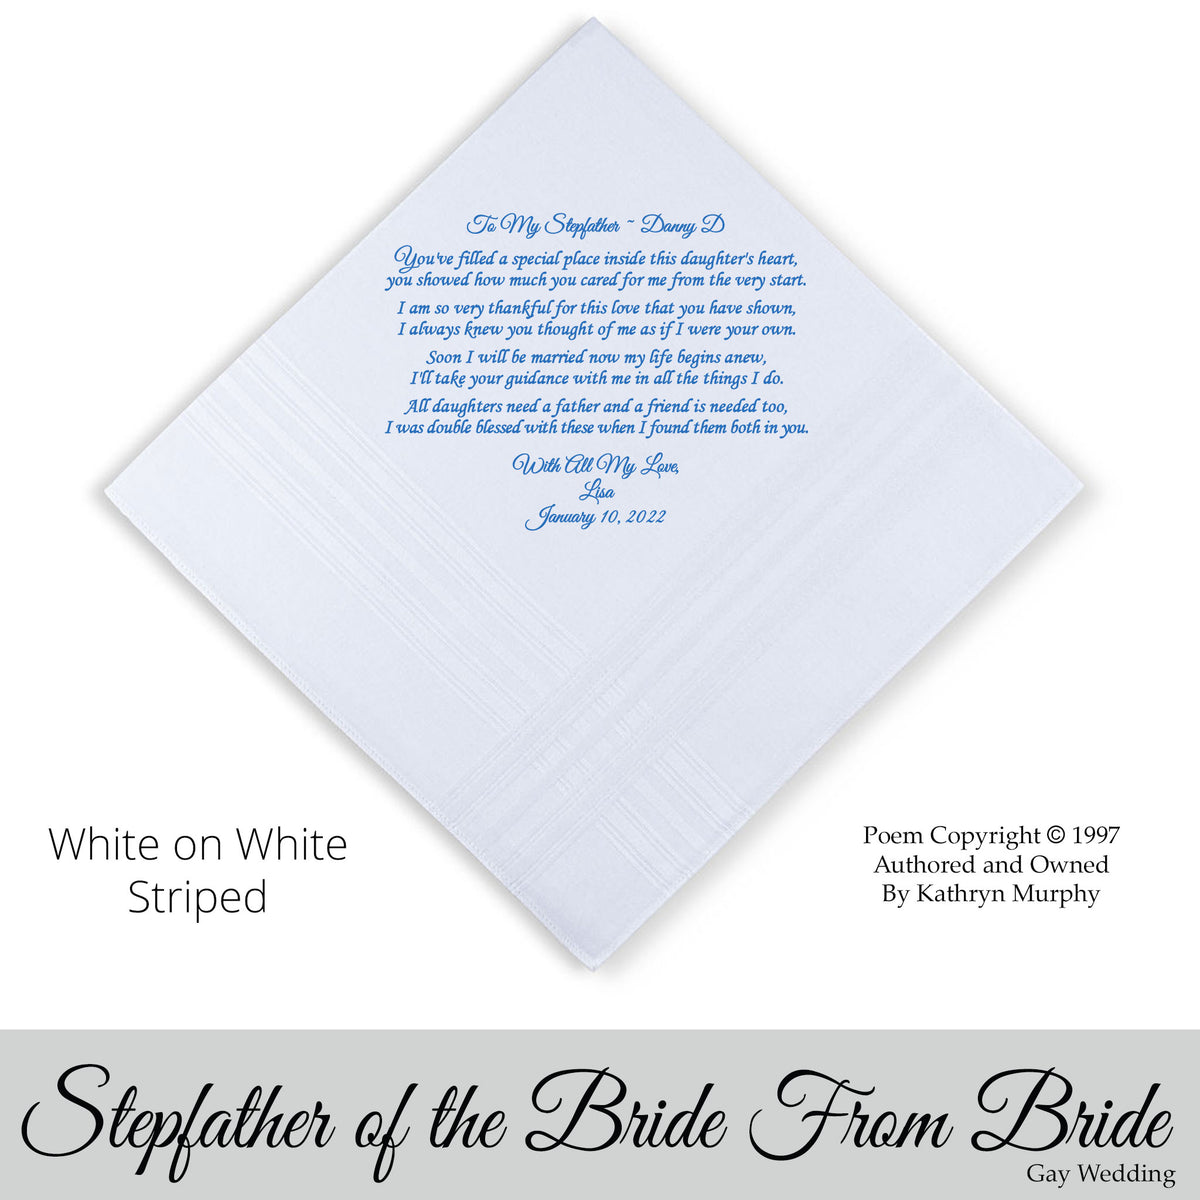 Gay Wedding Gift for the stepfather of the bride poem printed wedding hankie